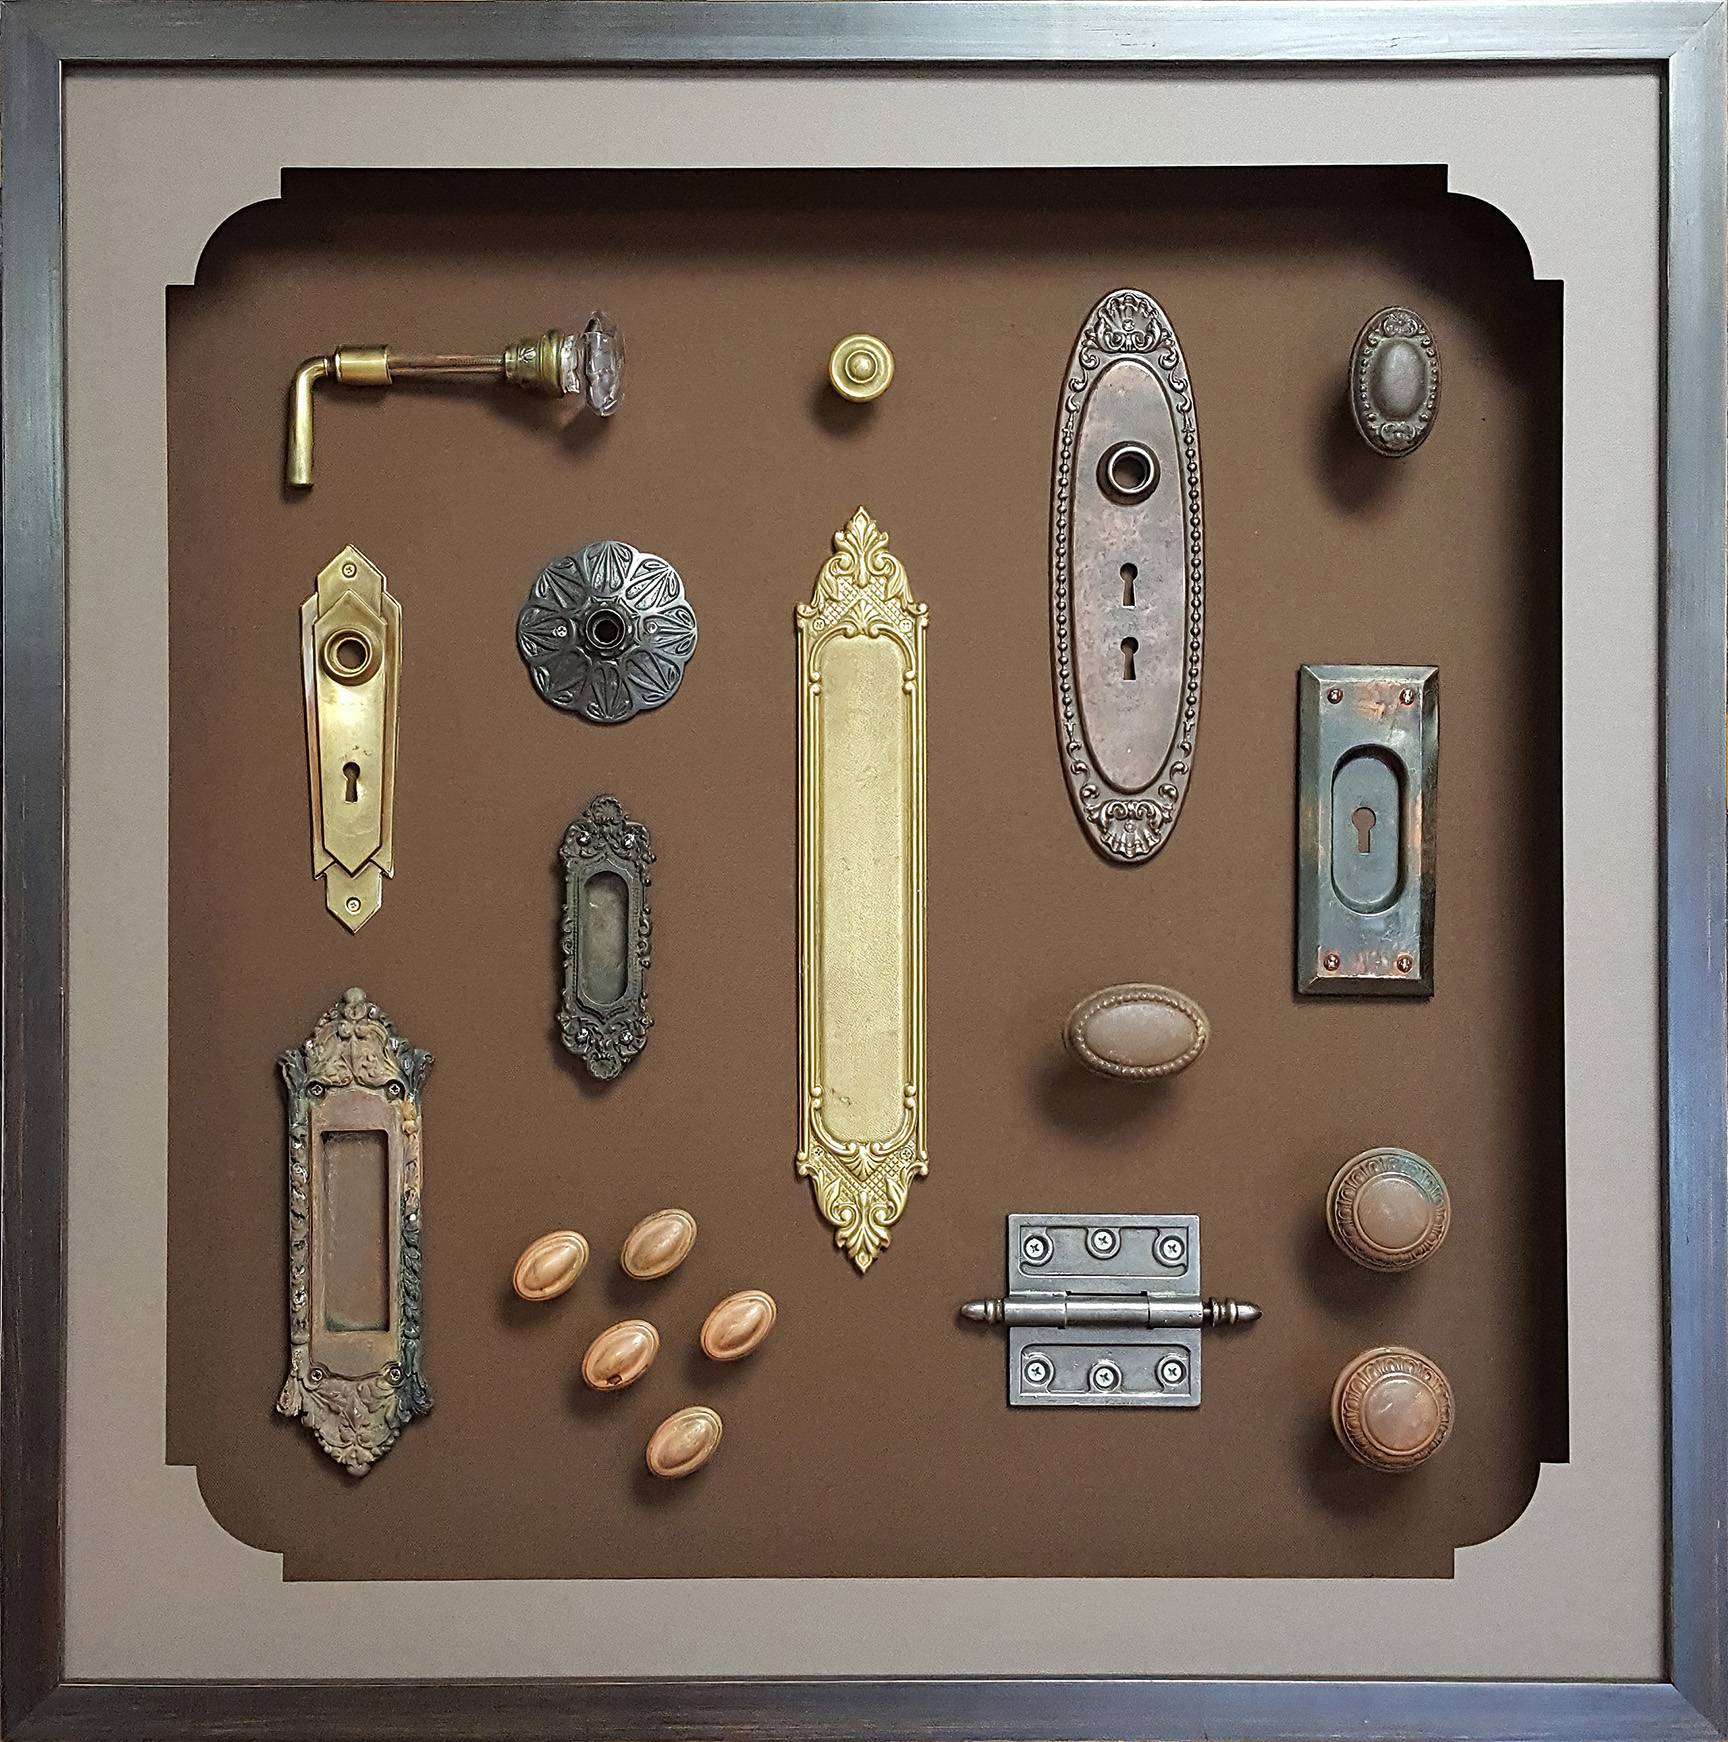 A shadow box with a vintage hardware